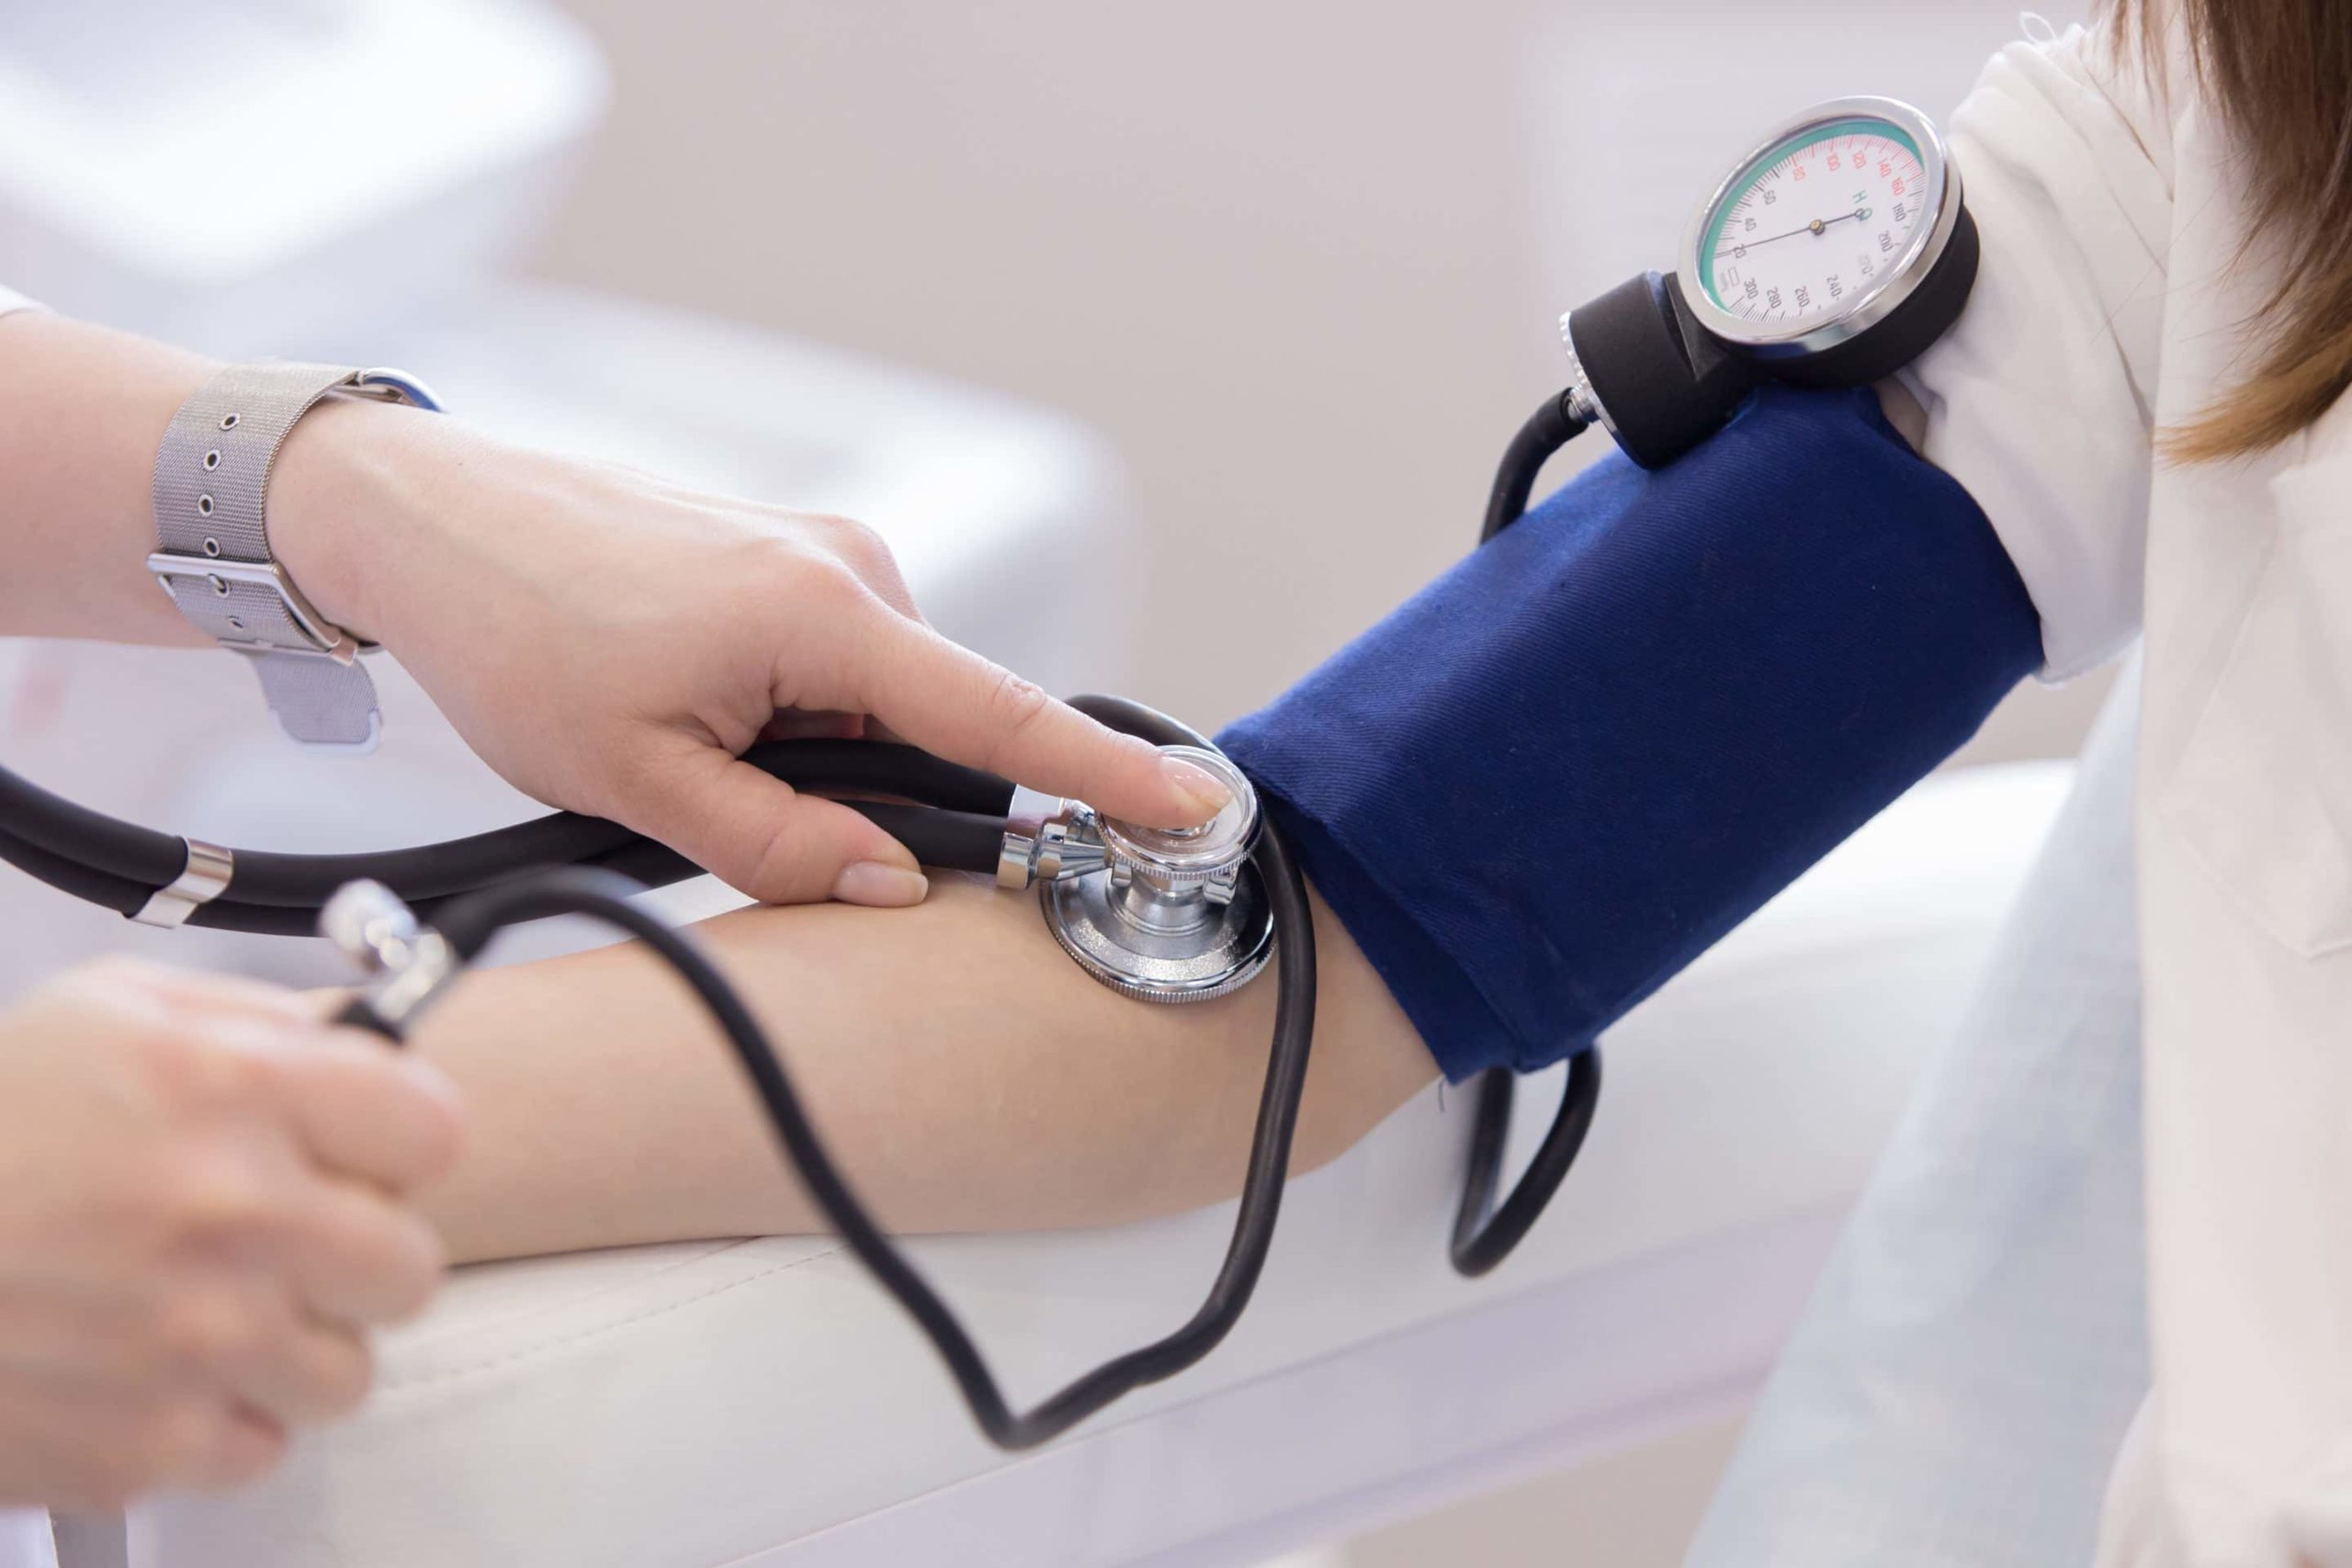 how to cure high blood pressure